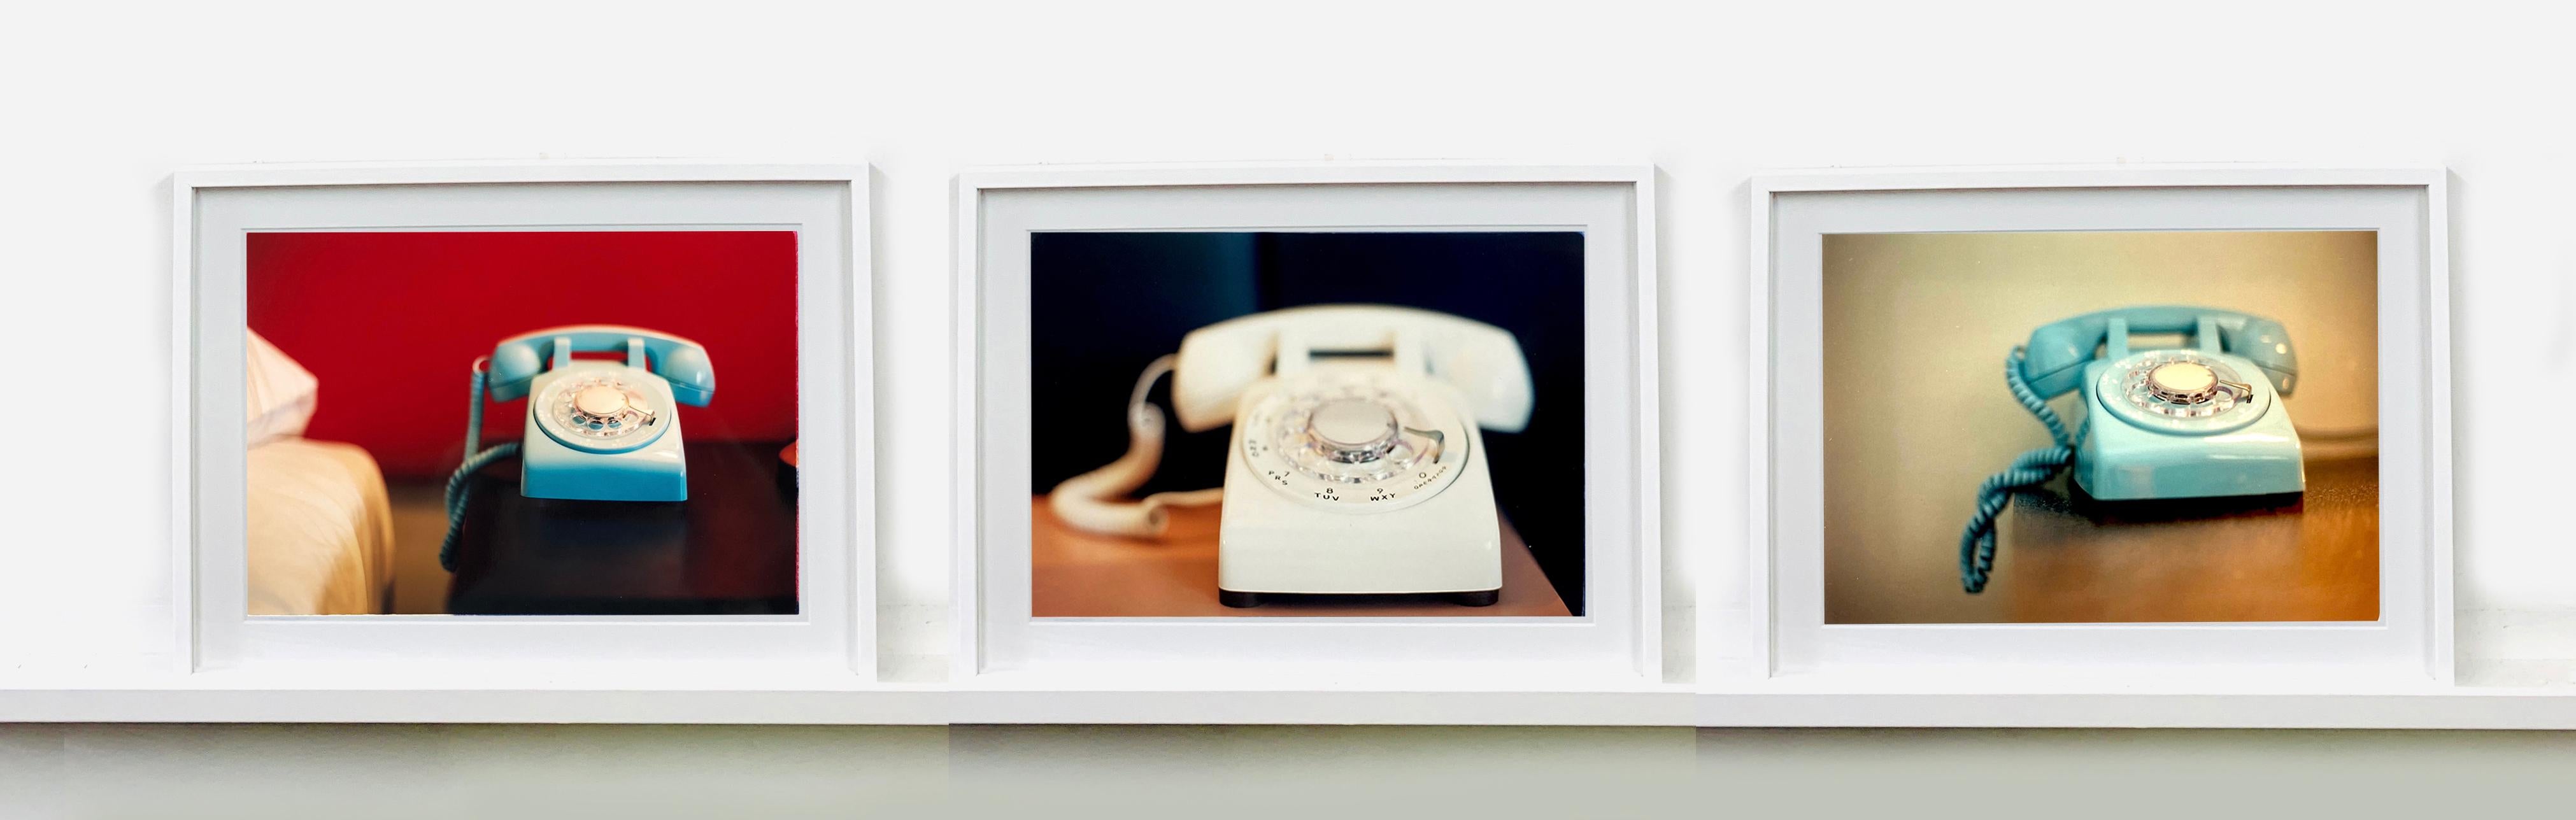 'Telephone VII' part of Richard Heeps 'Dream in Colour' Series. 
This cool Palm Springs interior photography featuring a vintage telephone on a nightstand combines  gorgeous pastel color tones and dreamy nostalgic mid-century vibes.

This artwork is